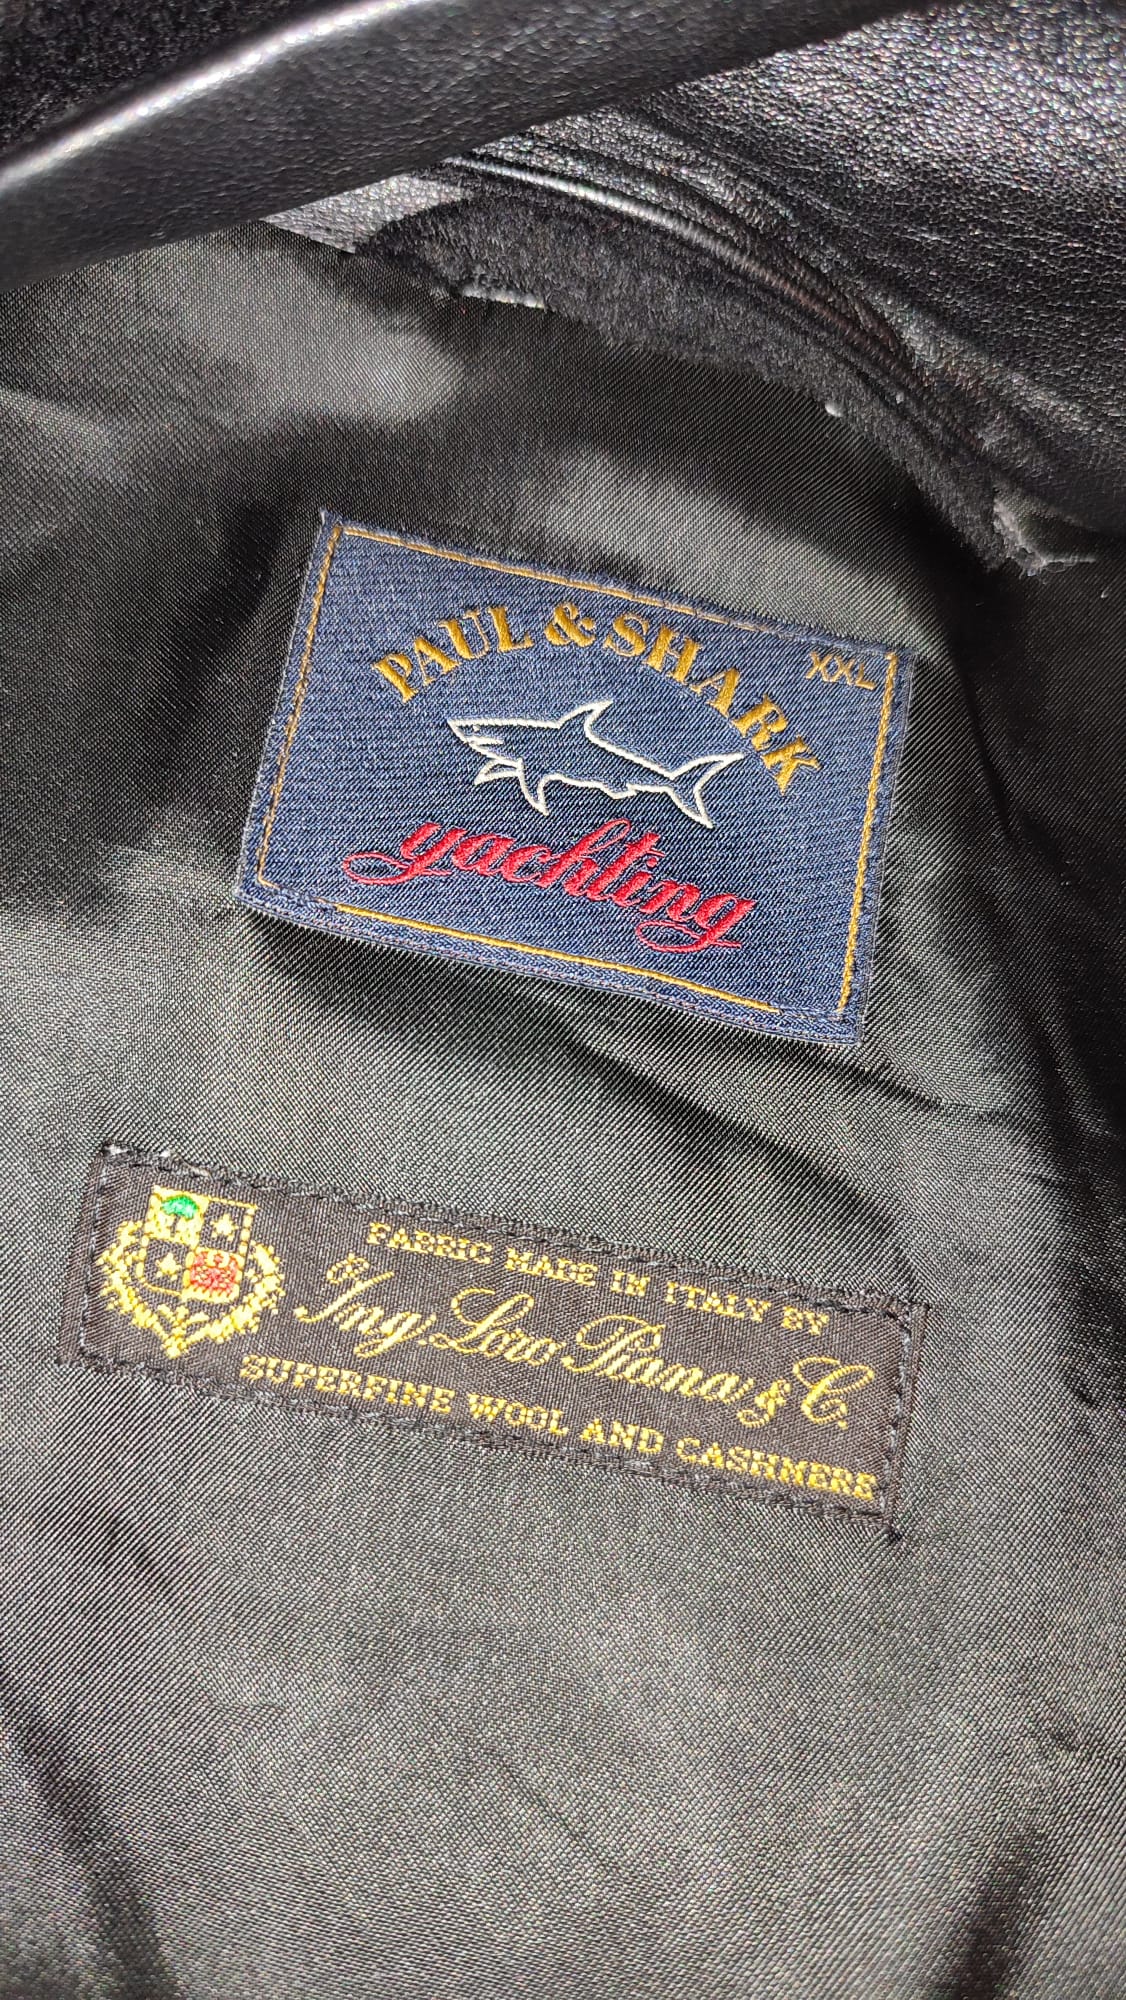 Vintage Paul & Shark Yachting Wool and Cashmere Black Coat